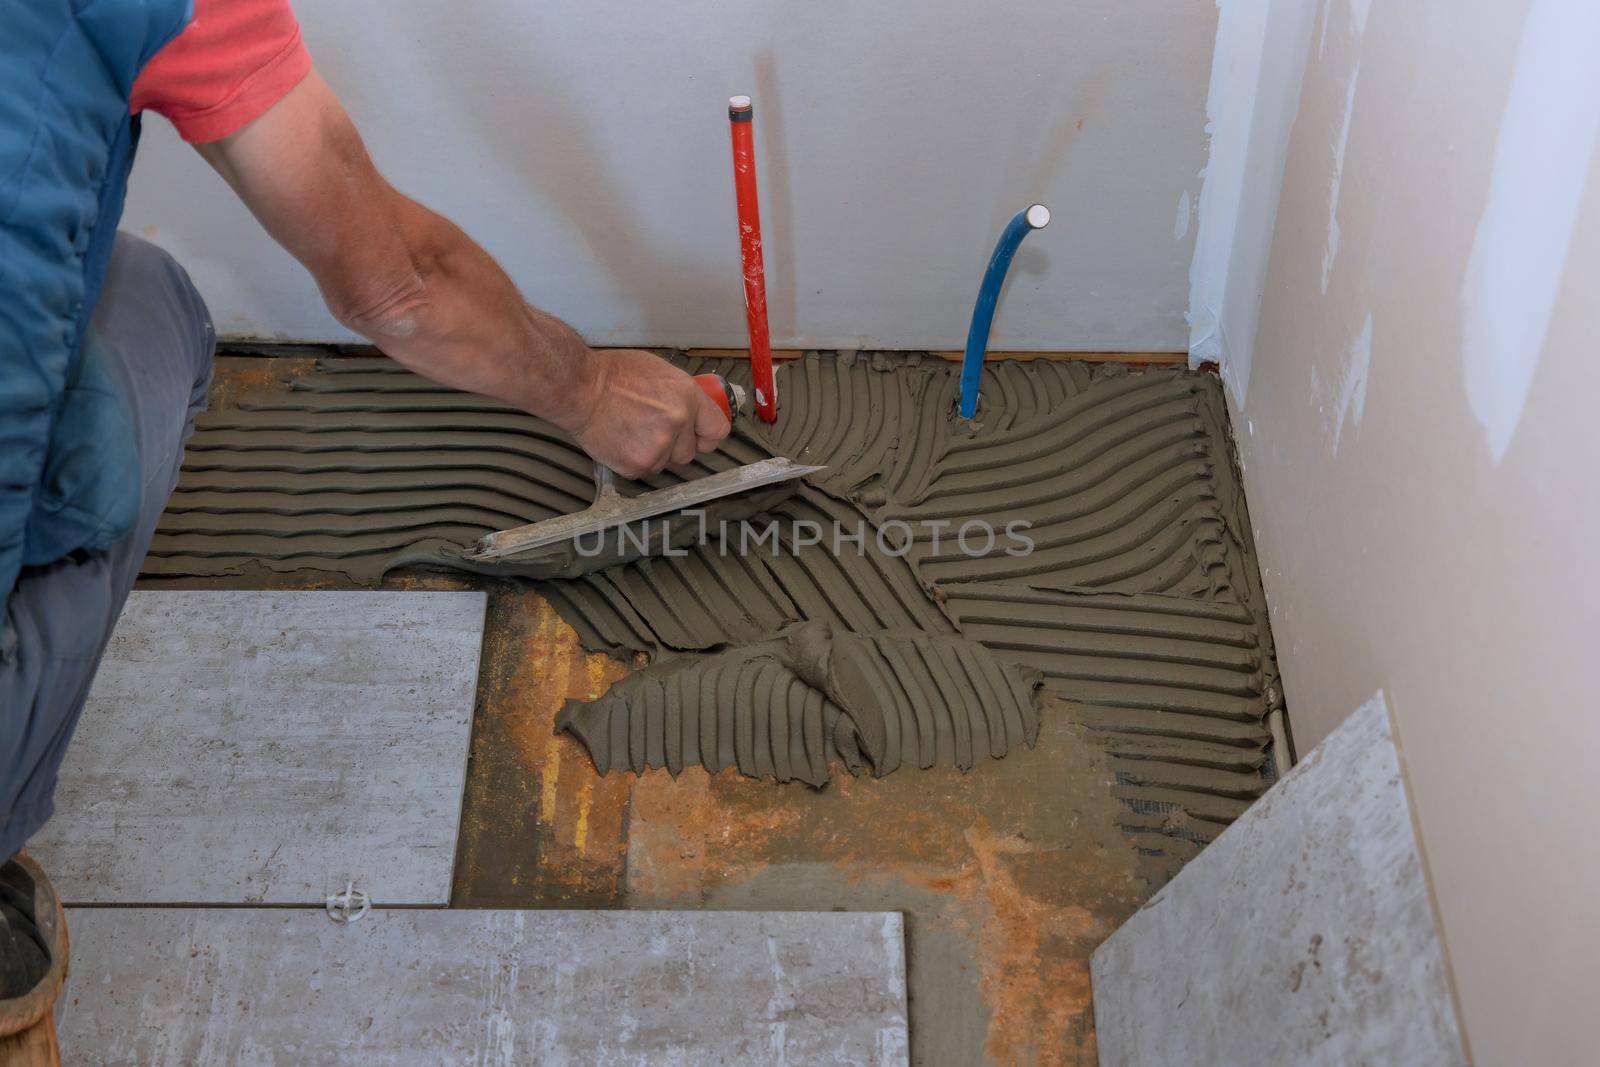 A man worker puts the tile using adhesive cement